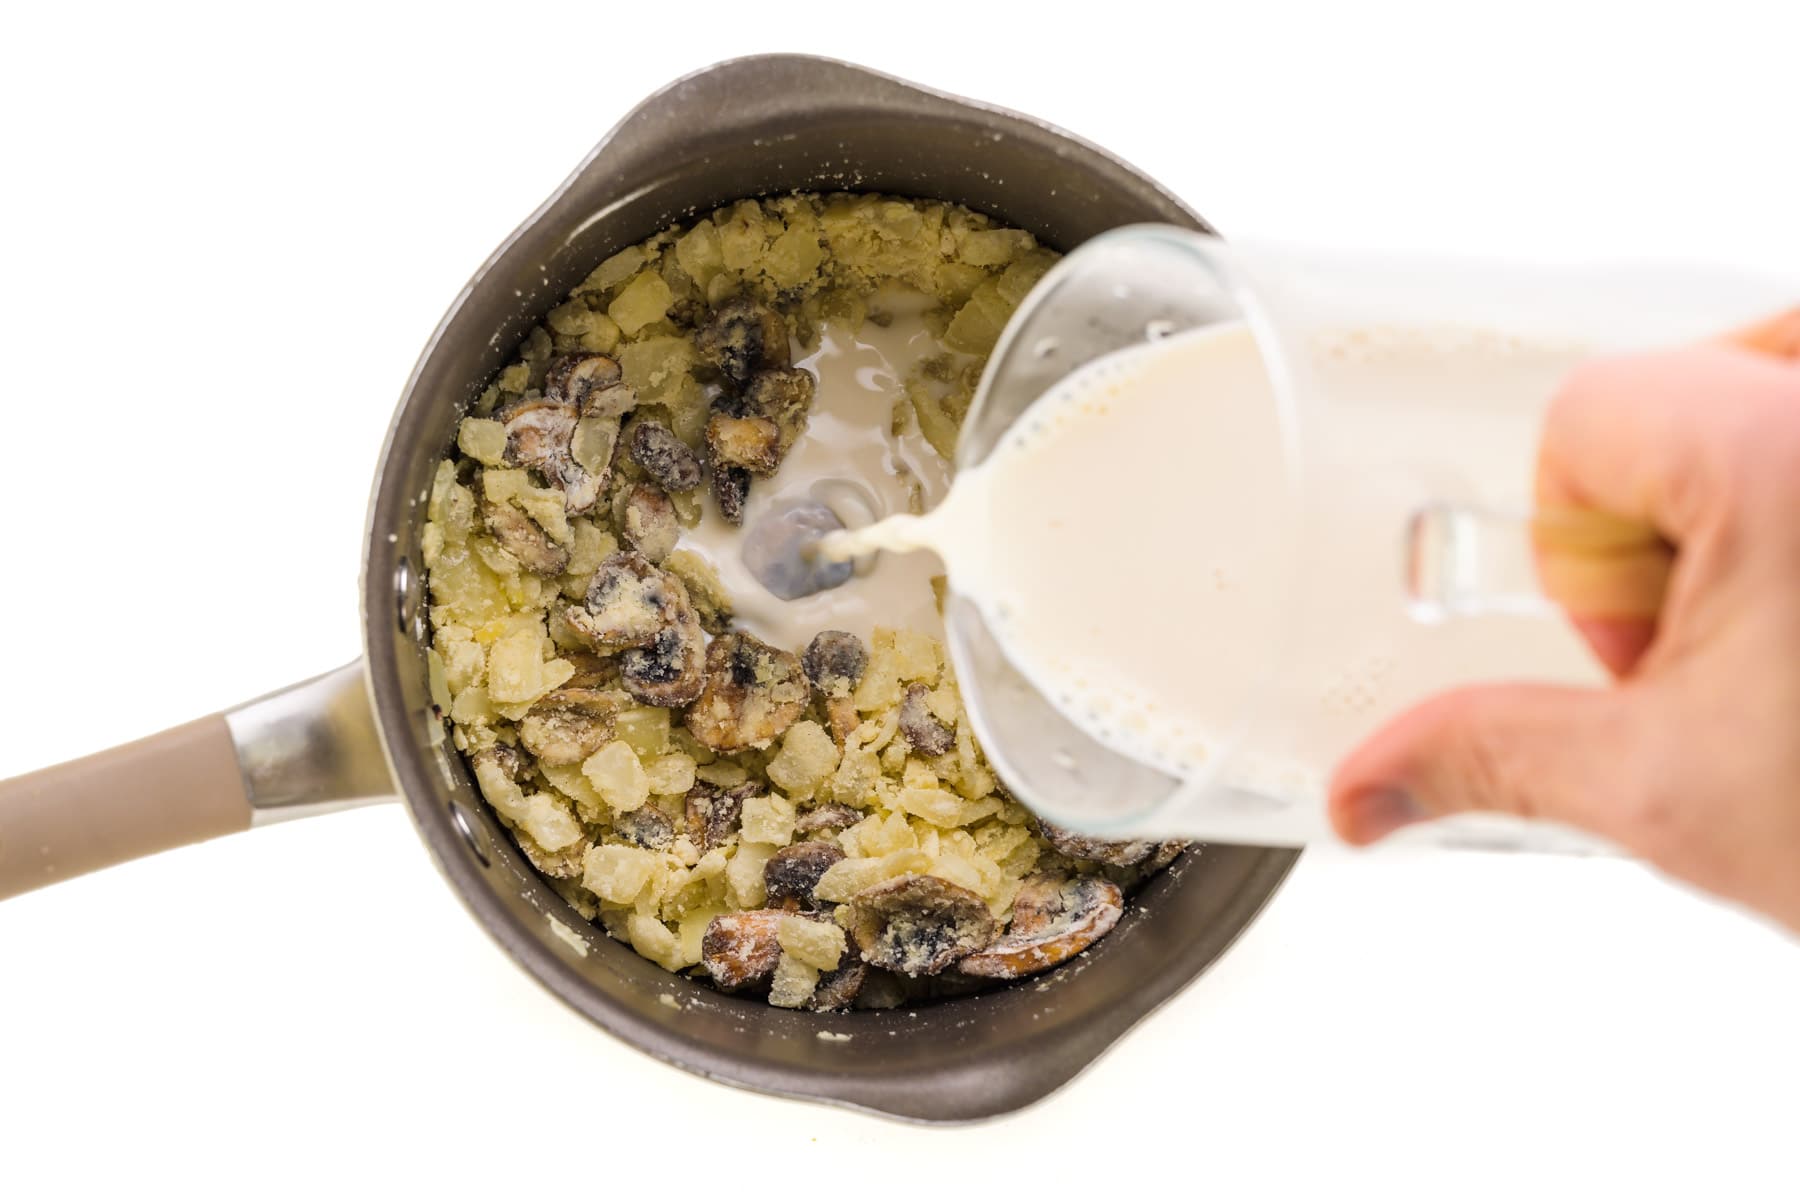 Plant-based milk is being poured into a saucepan with mushrooms and a roux.